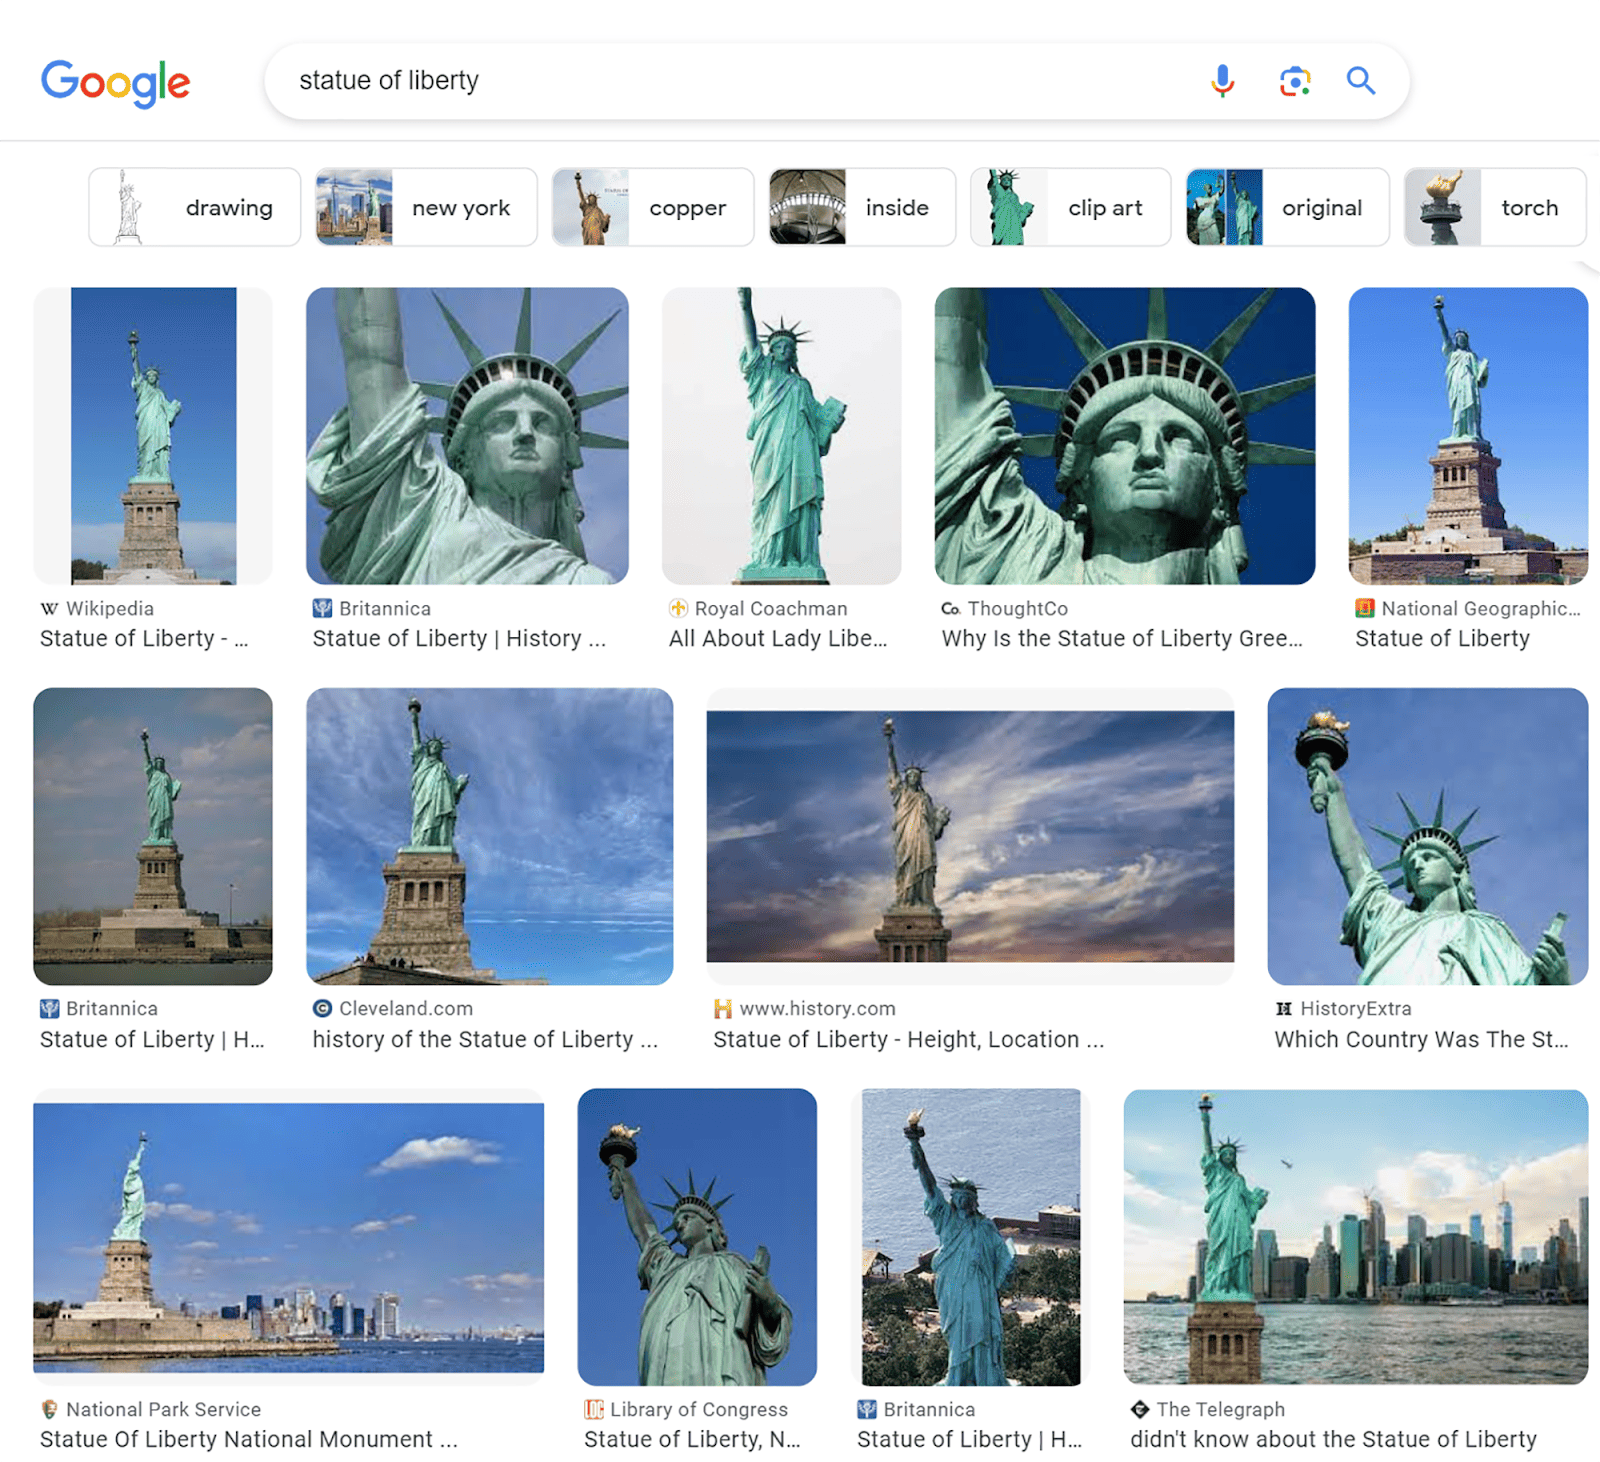 Google-Image-Pack-for-Statue-of-Liberty